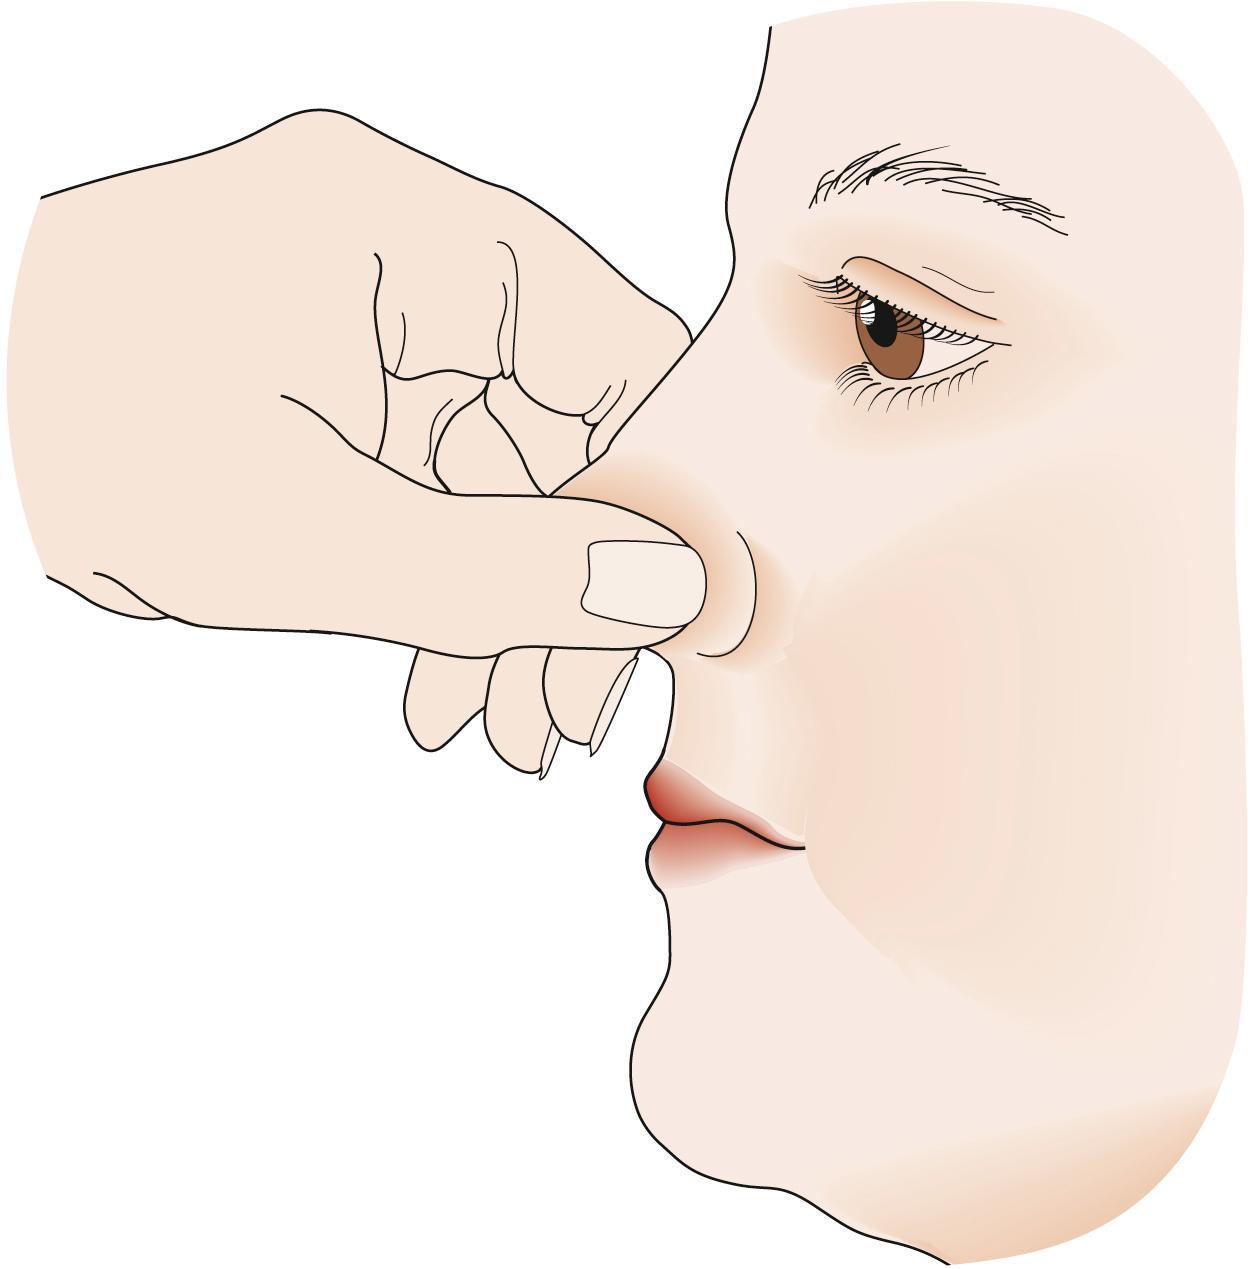 Fig. 27.13, Stopping epistaxis by squeezing the nose.